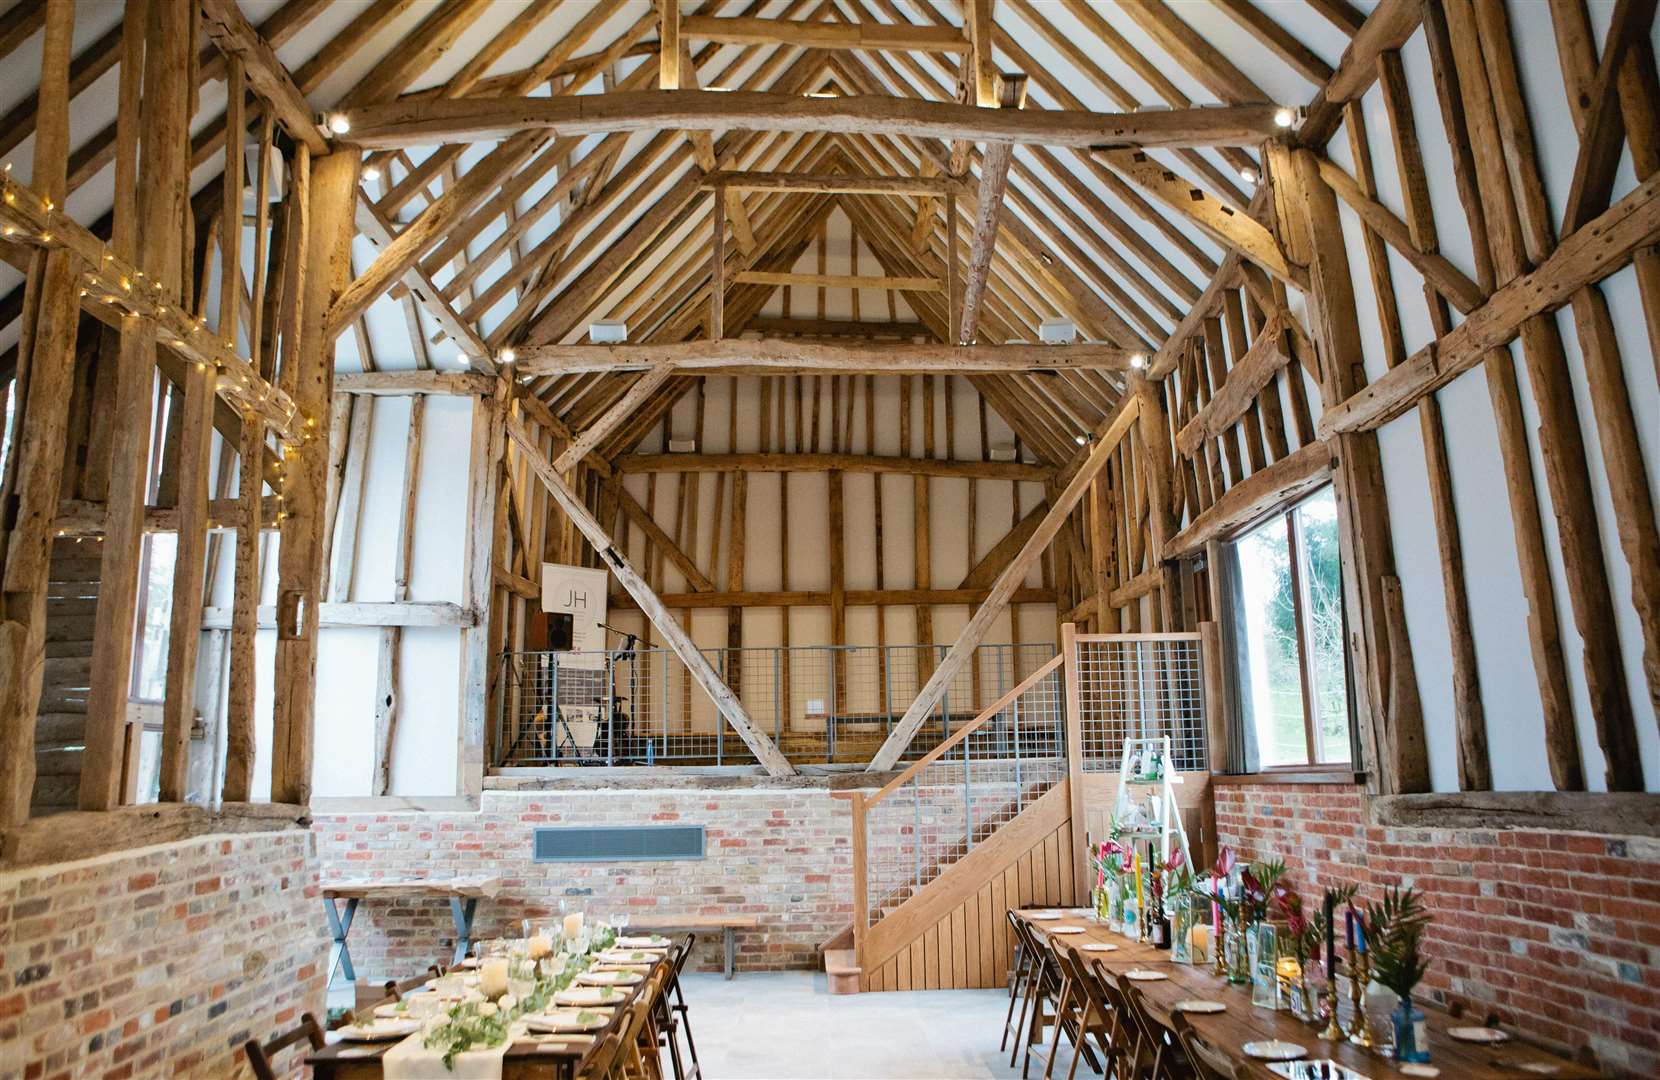 The Oak Barn is now a stunning new Grade II listed events venue